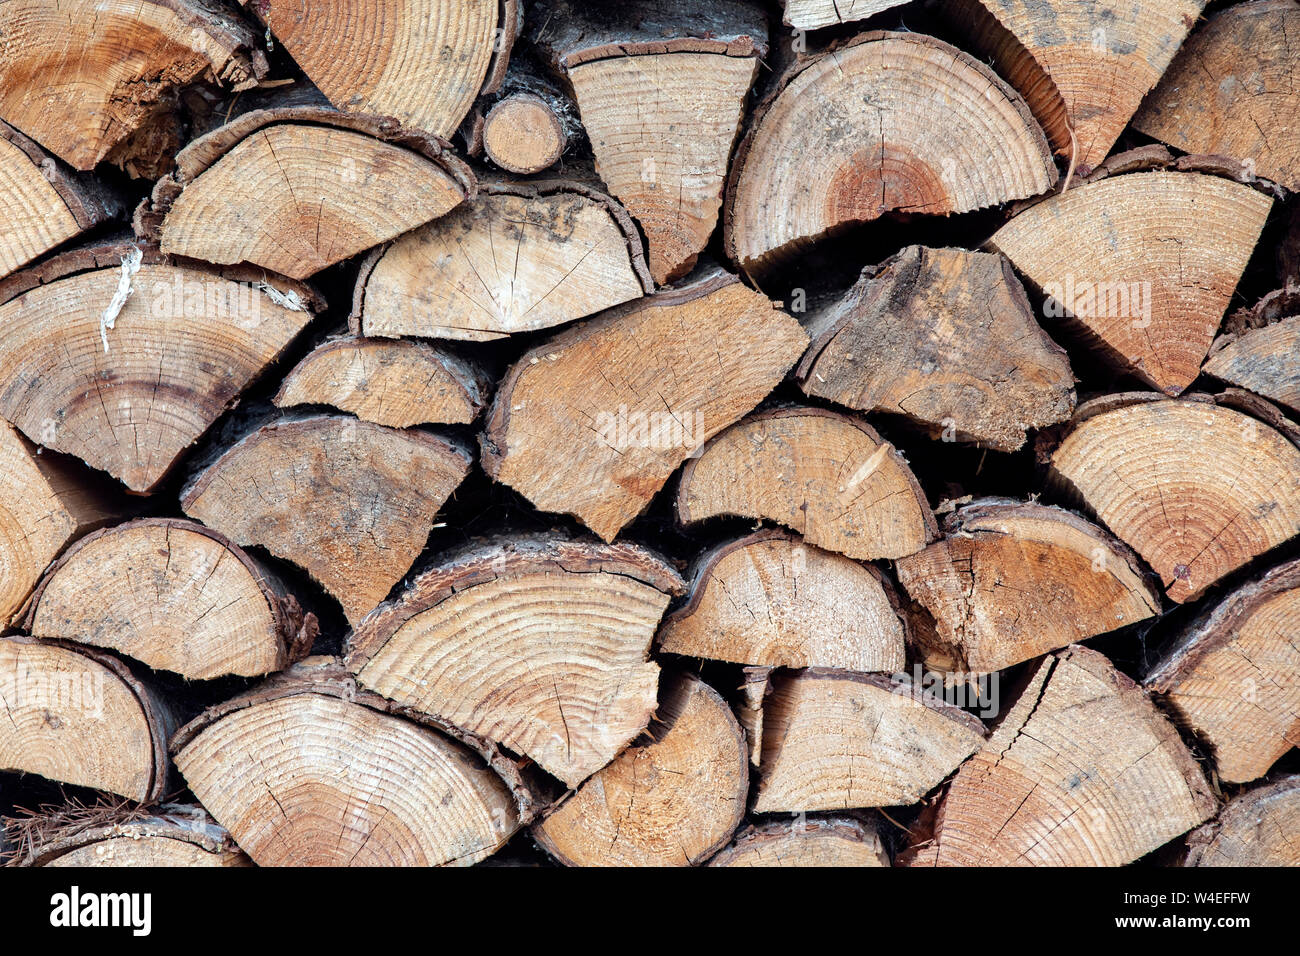 Close-up of a stack of Firewood - Strathcona Park Lodge in Strathcona Provincial Park, near Campbell River, Vancouver Island, British Columbia, Canada Stock Photo